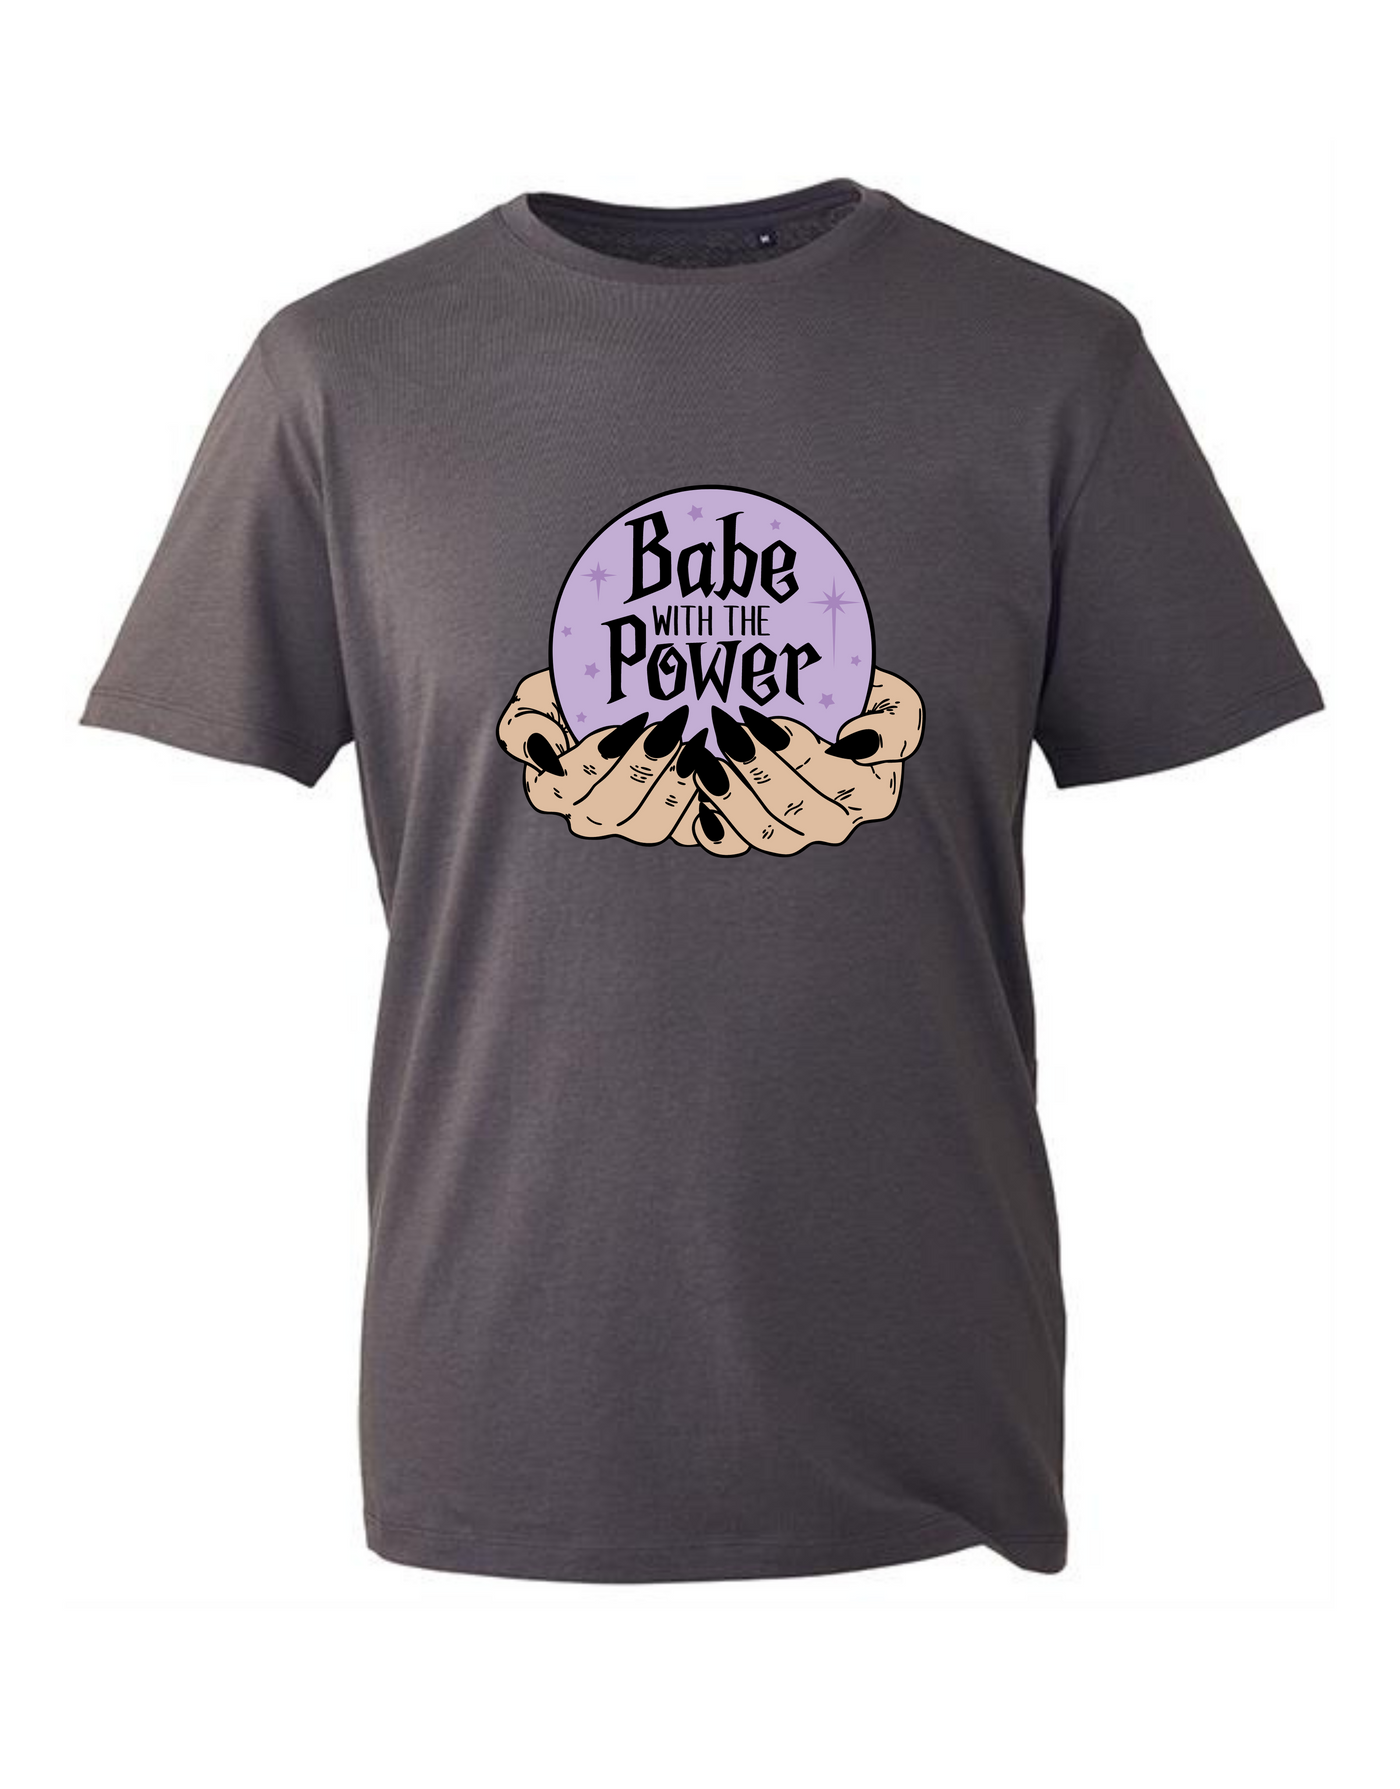 "Babe With The Power" Unisex Organic T-Shirt